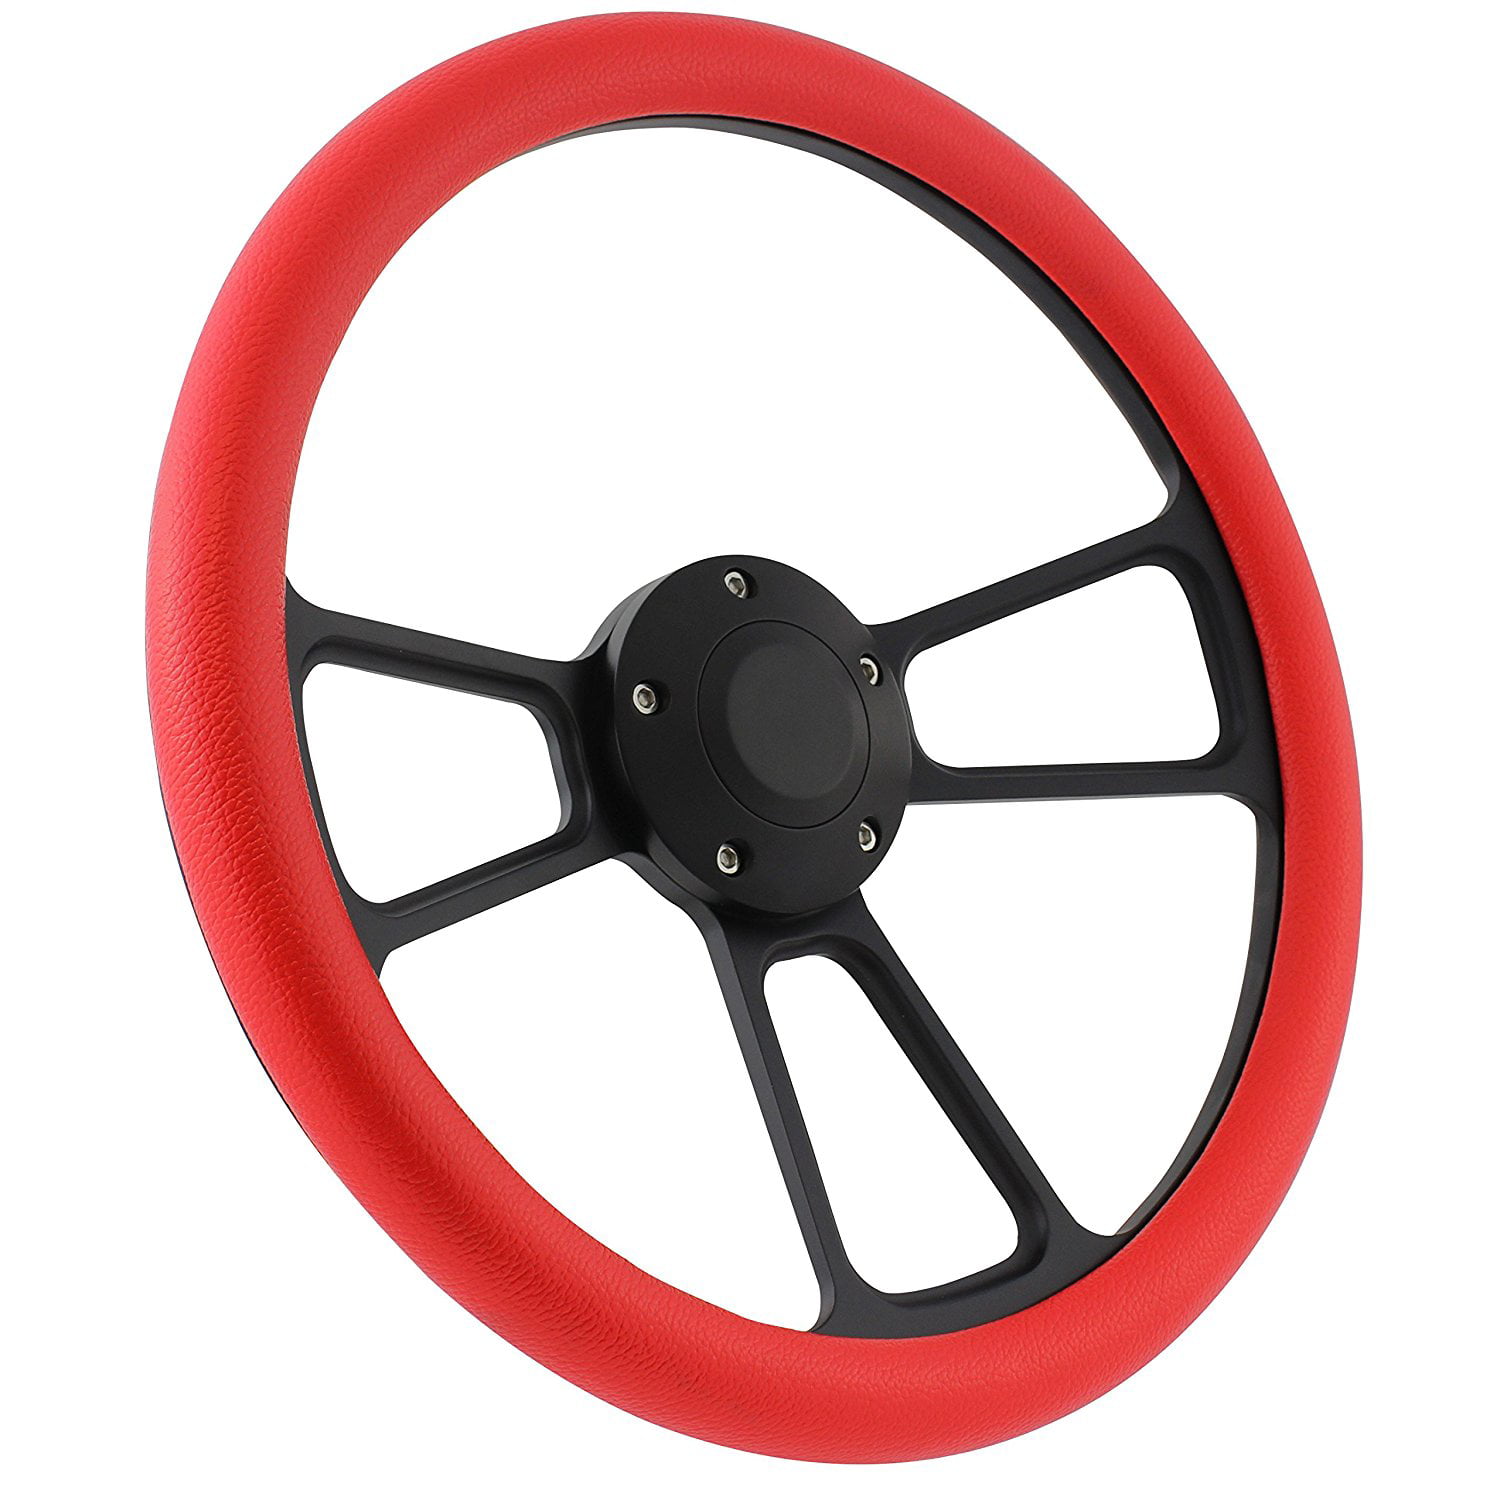 Horn Button Boat Steering Wheel 14 Inch Aluminum With Red Vinyl Half Wrap and Installation Adapter 